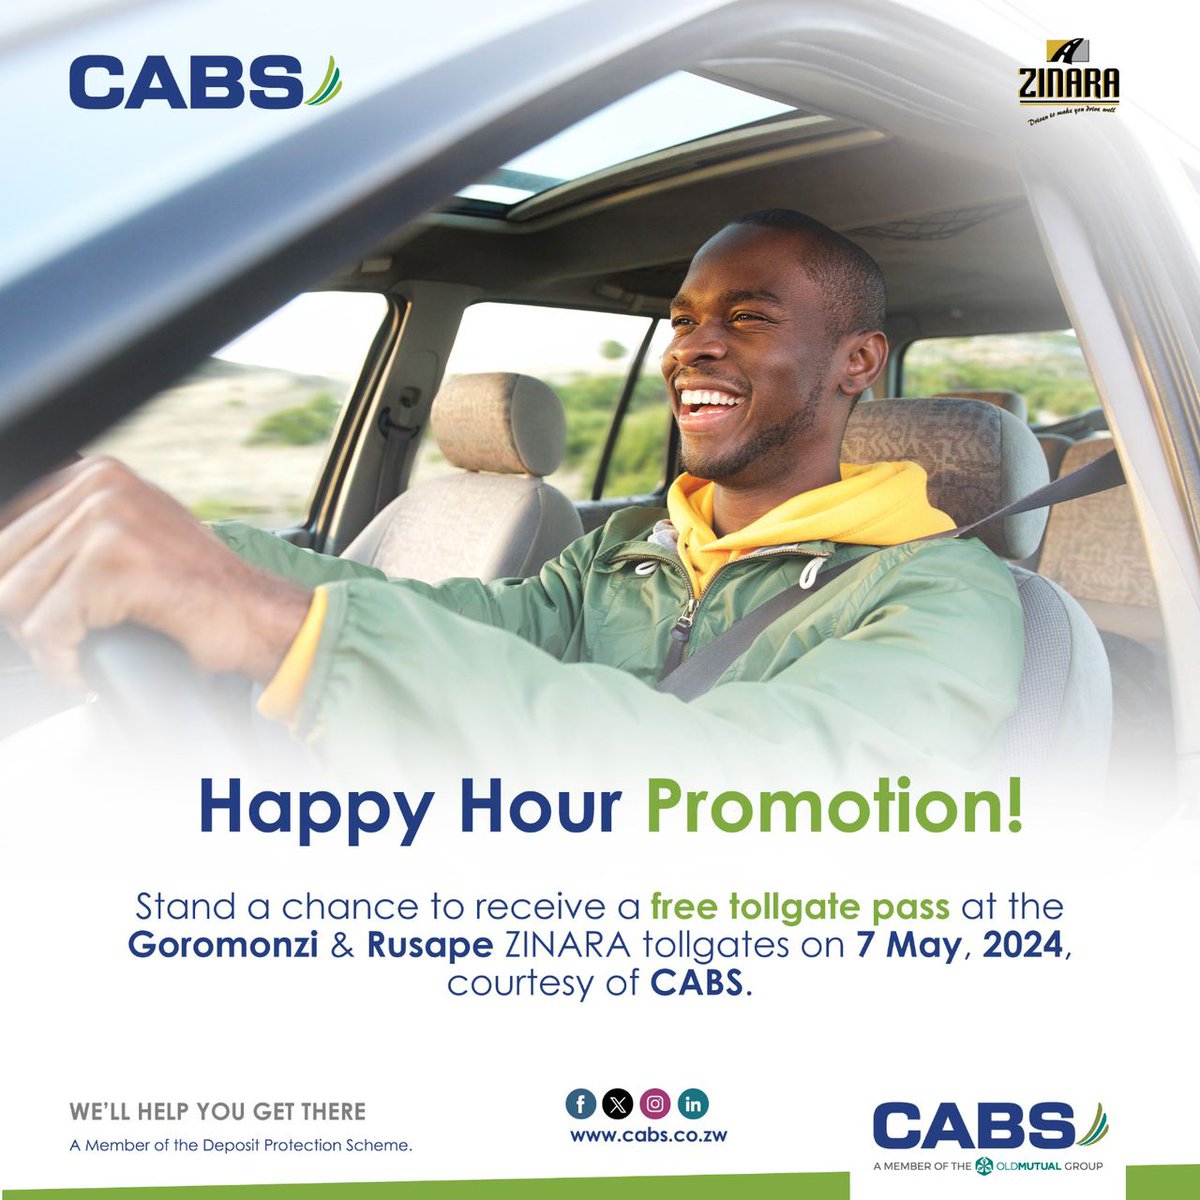 Look out for the @OldMutualZW  & @CabsZimbabwe   Team at our Goromonzi & Rusape Tollgates today.

They are spreading #backtoschool cheer and telling their story.

#HappyHourPromotion
#PartnersForProgress